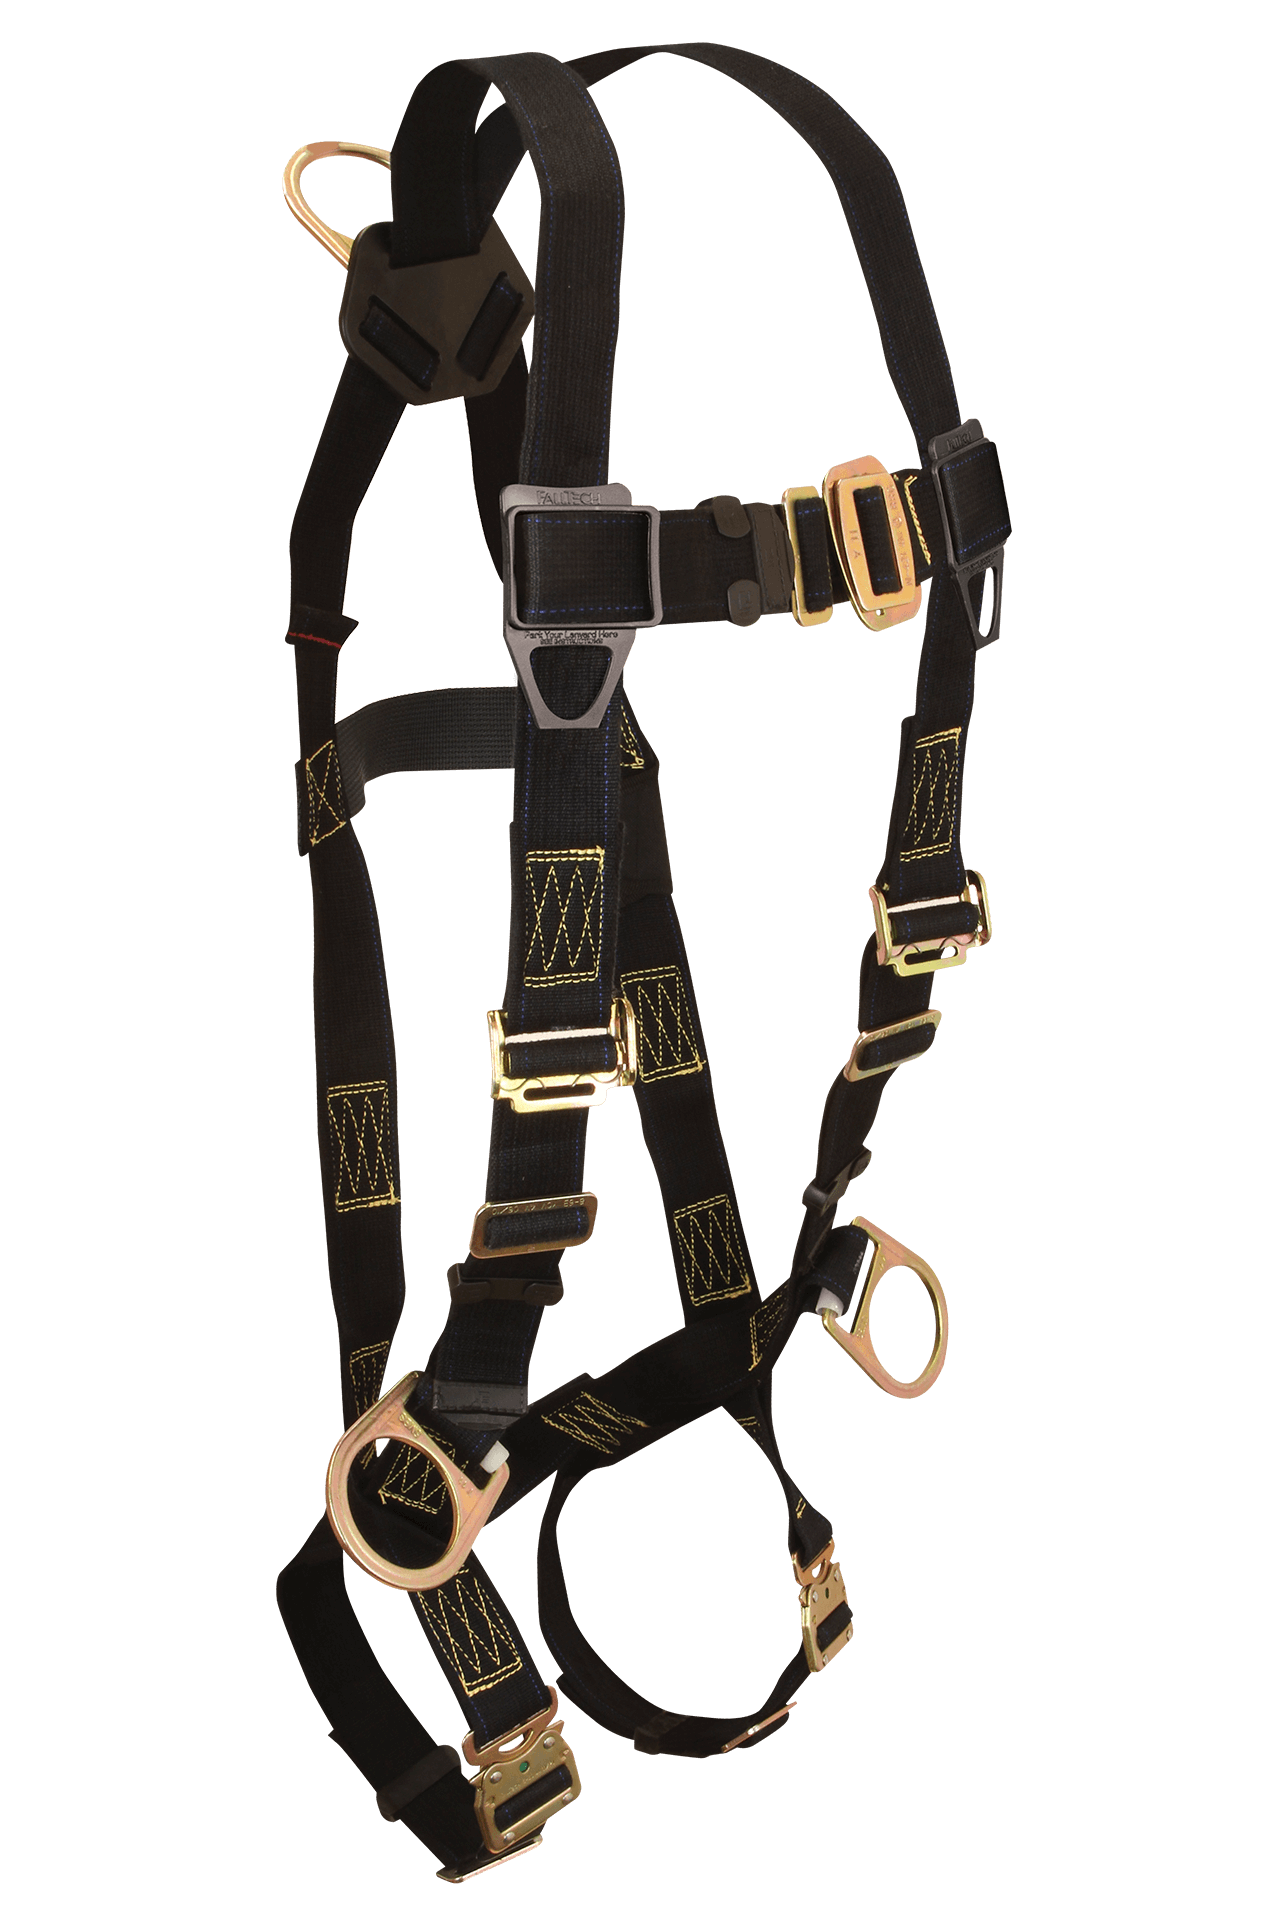 Generic Half Body Harness Safety Rock Climbing Outdoor Fall Protection  Black